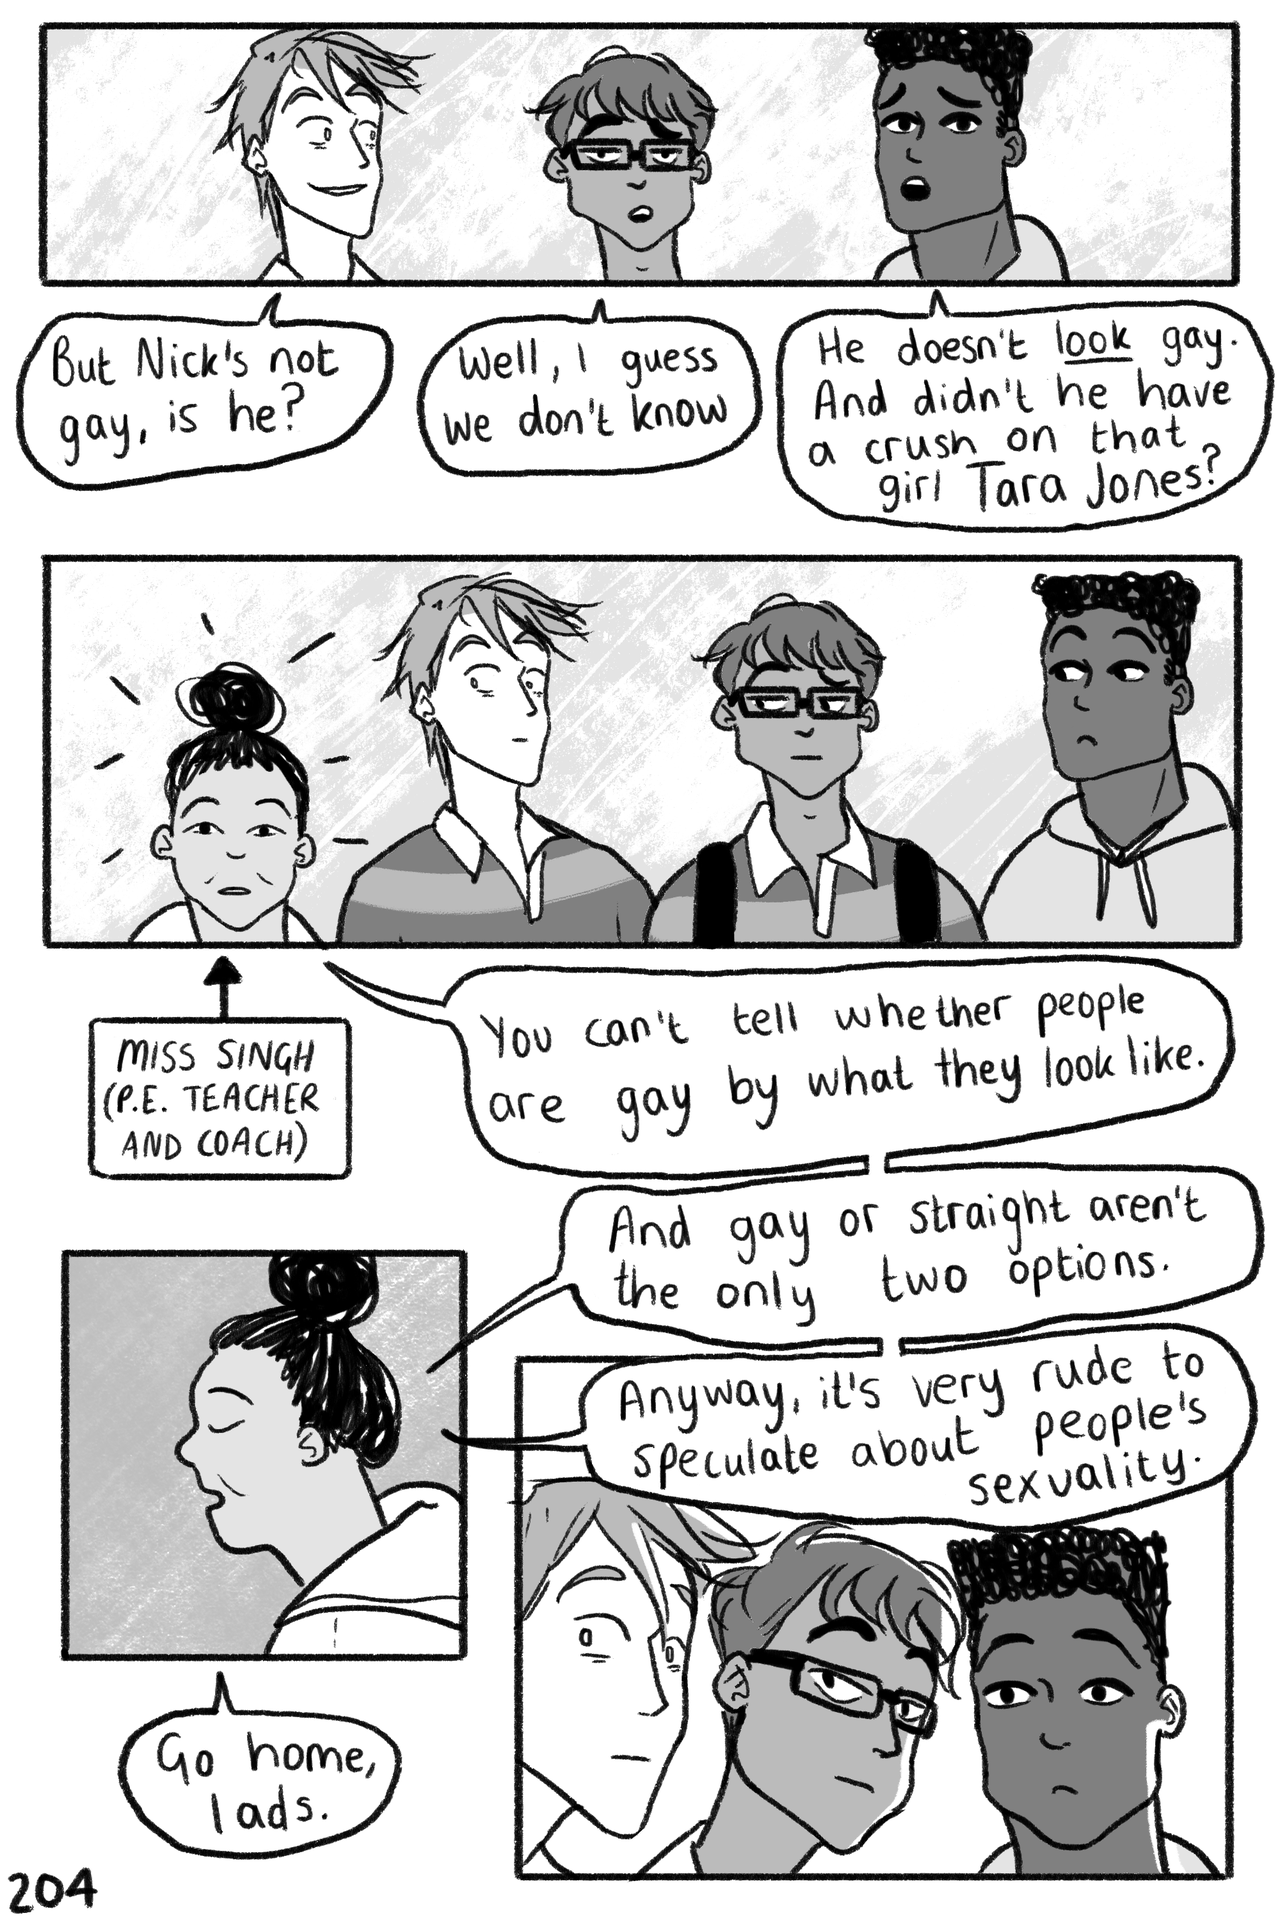 An excerpt from "Heartstopper Vol 1" showing Nick's rugby teammates questioning his sexuality and their coach chastising the teammates. 